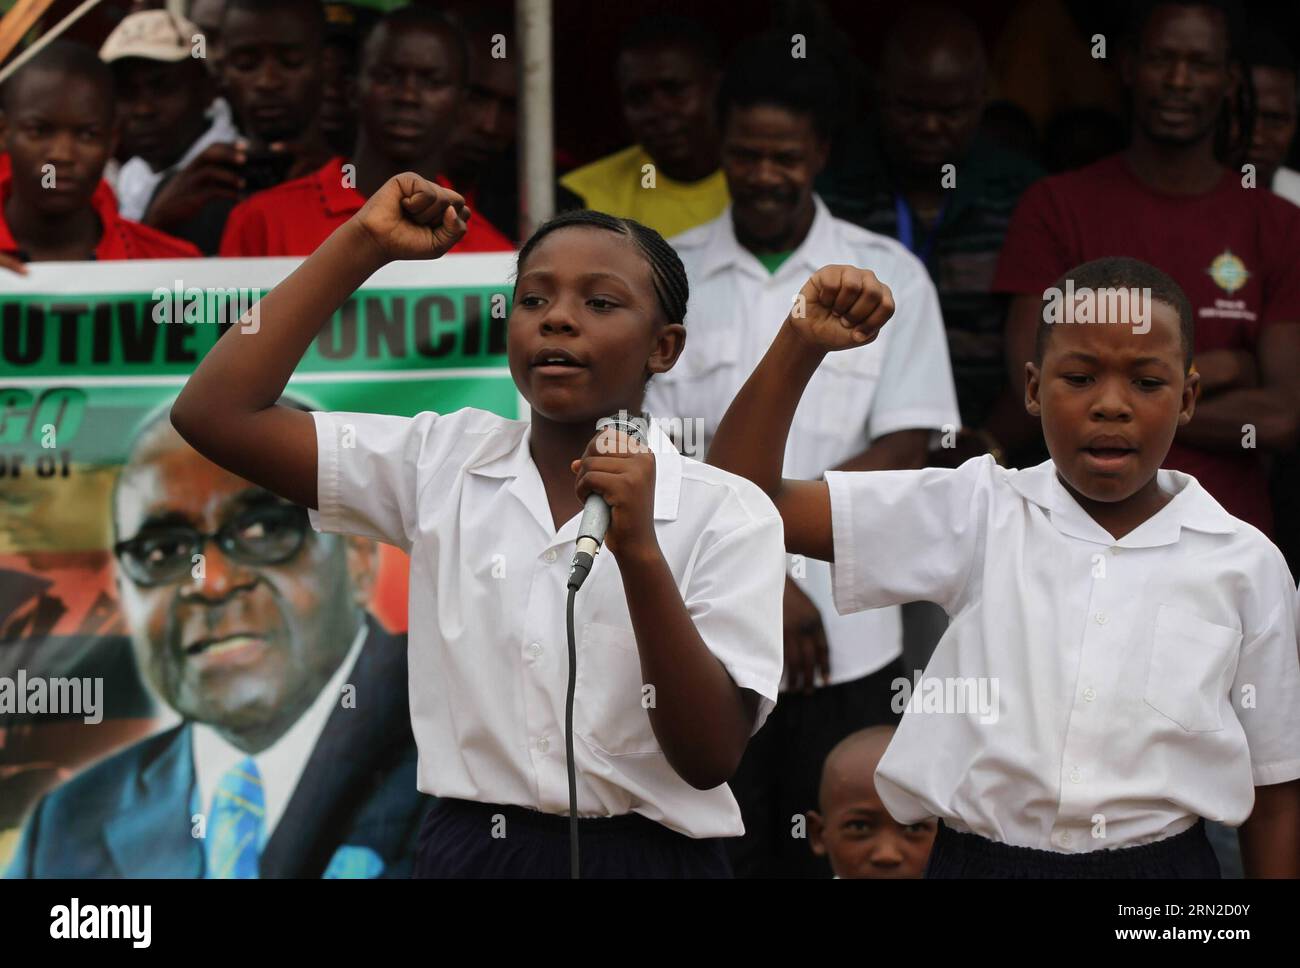 (150228) -- VICTORIA FALLS (ZIMBABWE), Feb. 28, 2015 () -- Two students speak to show support at a public celebration held to mark the 91st birthday of Zimbabwean President Robert Mugabe in Victoria Falls, Zimbabwe, Feb. 28, 2015. Mugabe, who turns 91 this month, is the oldest leader in the world and one of the longest-serving African statesmen. Having ruled Zimbabwe for 35 years since independence, Mugabe was endorsed by the ruling ZANU-PF party as the sole candidate to contest at the age of 94 in the next presidential election in 2018. () ZIMBABWE-VICTORIA FALLS-MUGABE-BIRTHDAY Xinhua PUBLIC Stock Photo